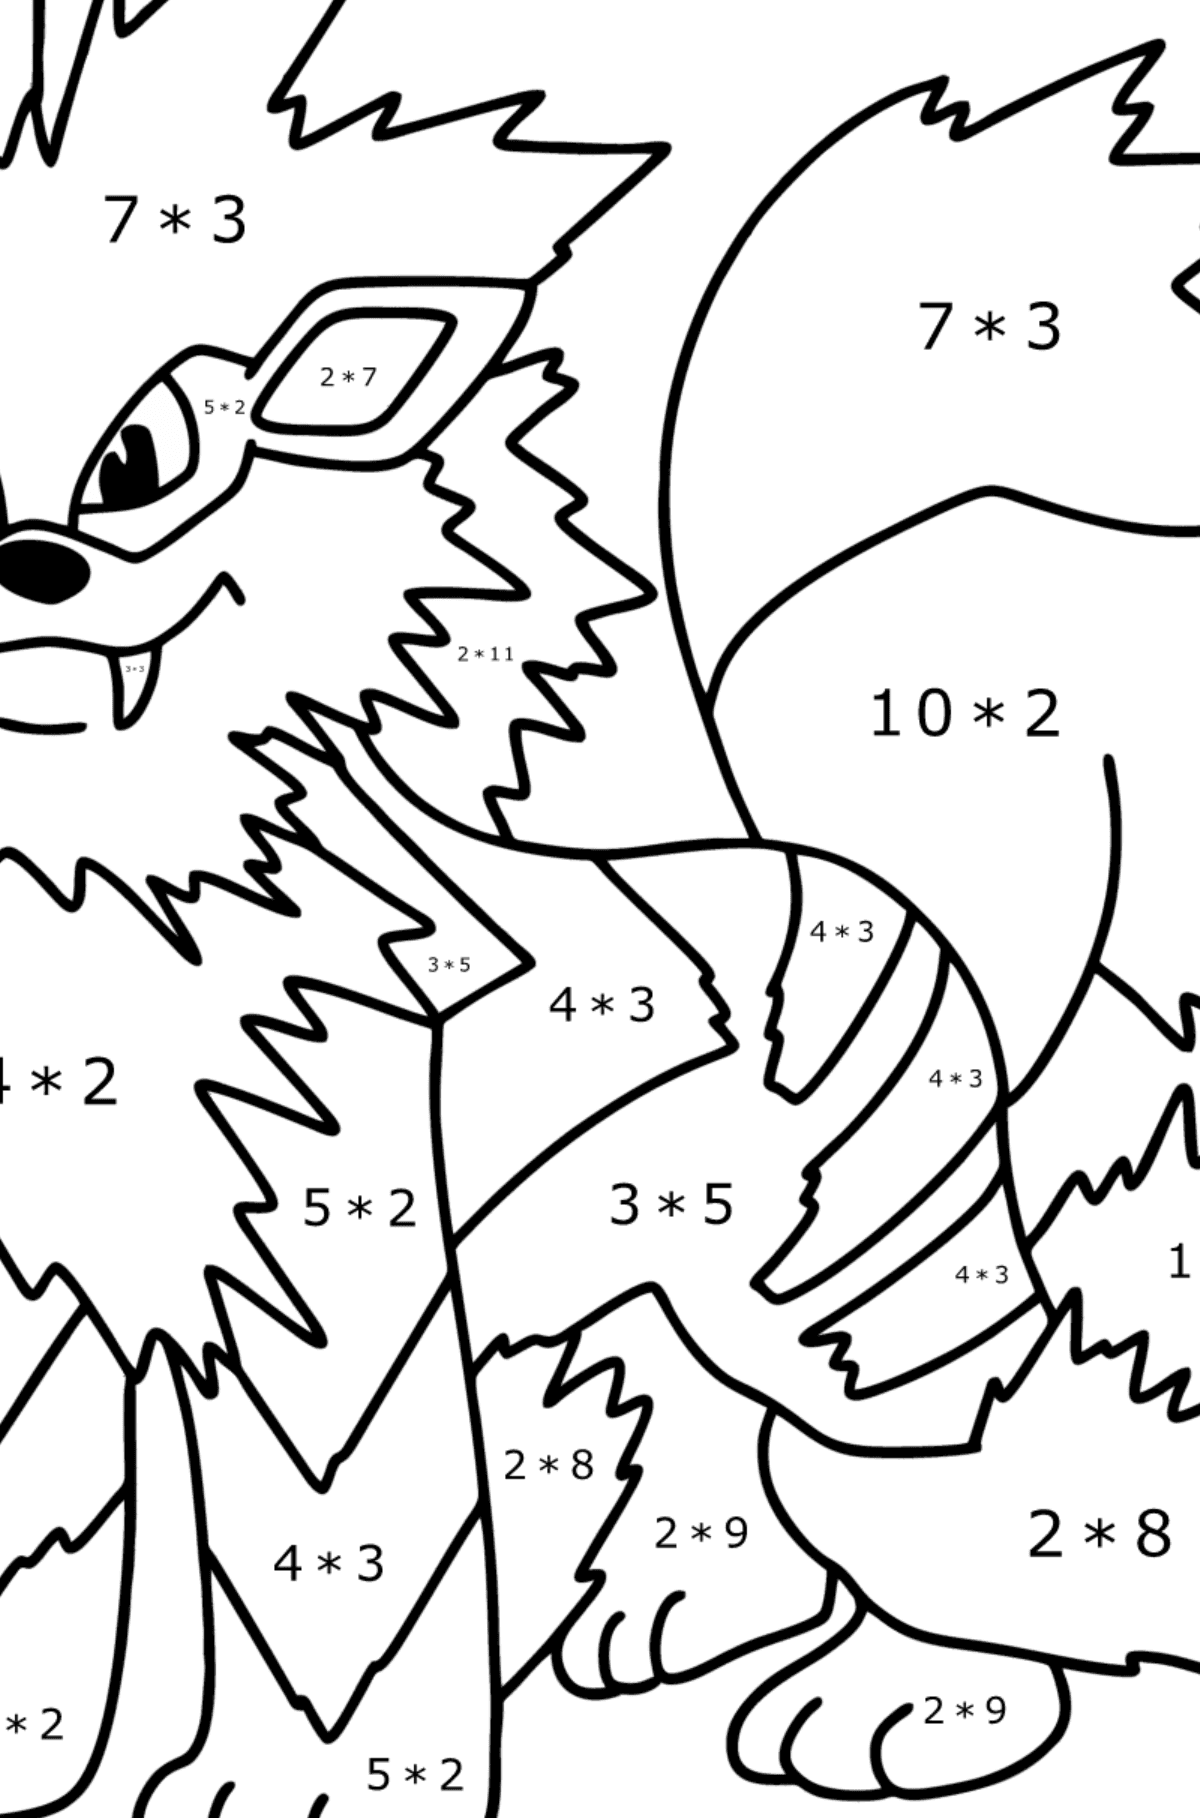 Pokémon Go Arcanine coloring page - Math Coloring - Multiplication for Kids